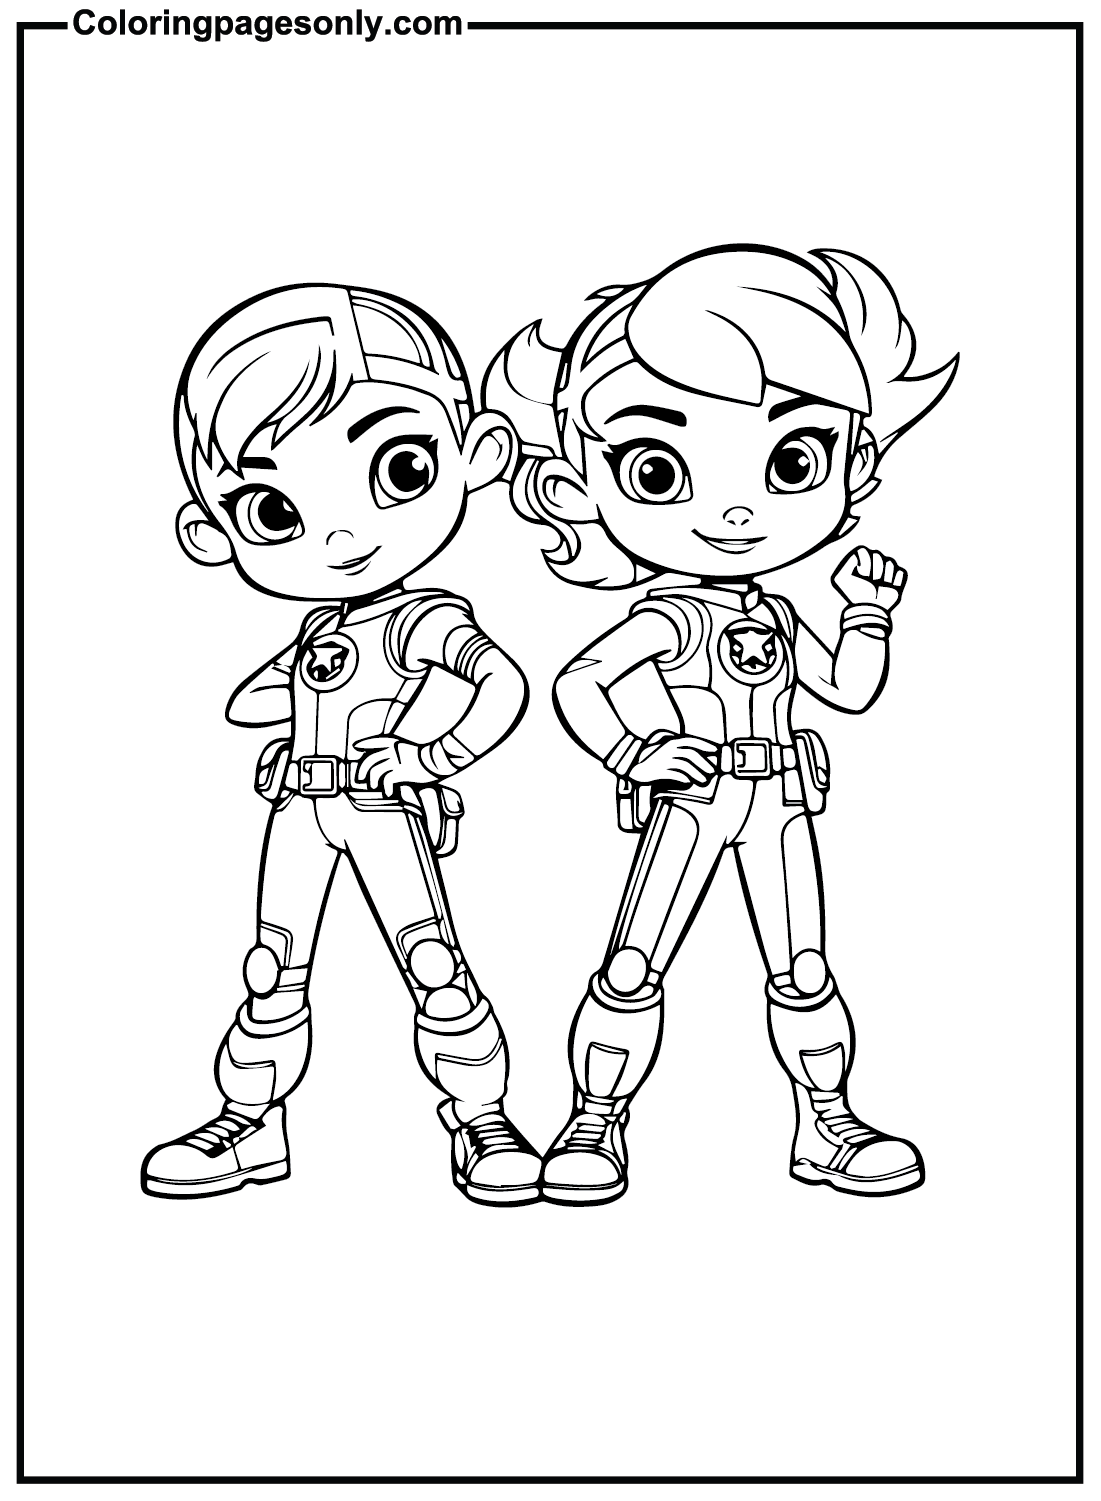 Images Rainbow Rangers Coloring Pages